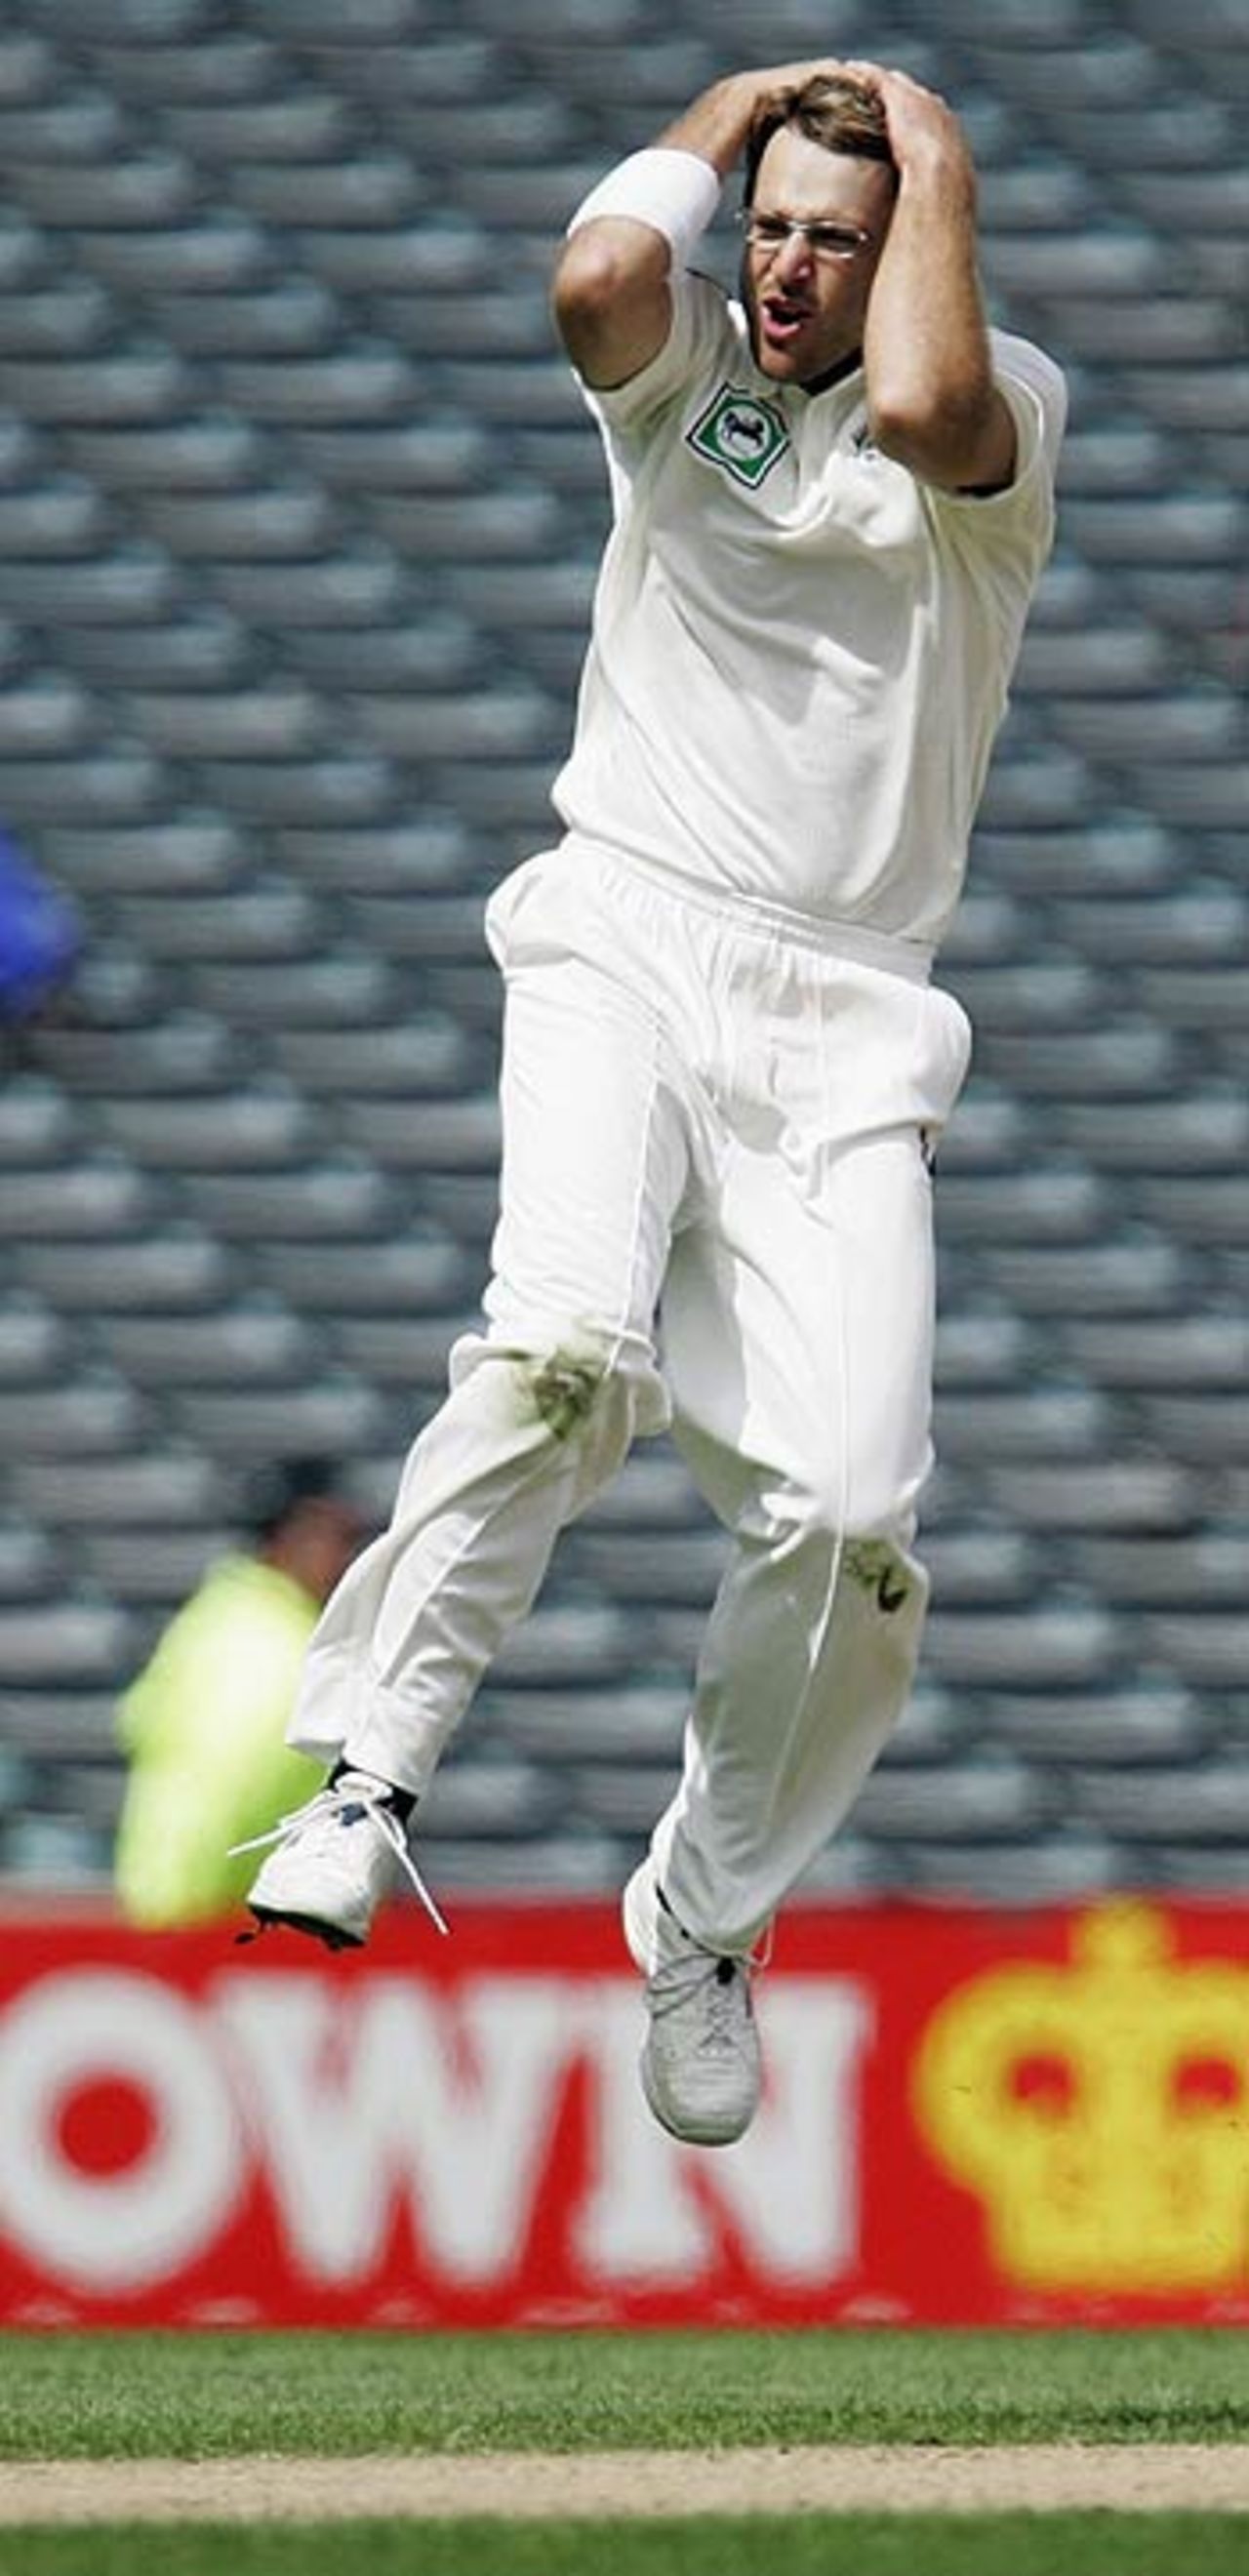 Daniel Vettori reacts to a dropped catch, New Zealand v West Indies, 1st Test, Auckland, 4th day, March 12, 2006